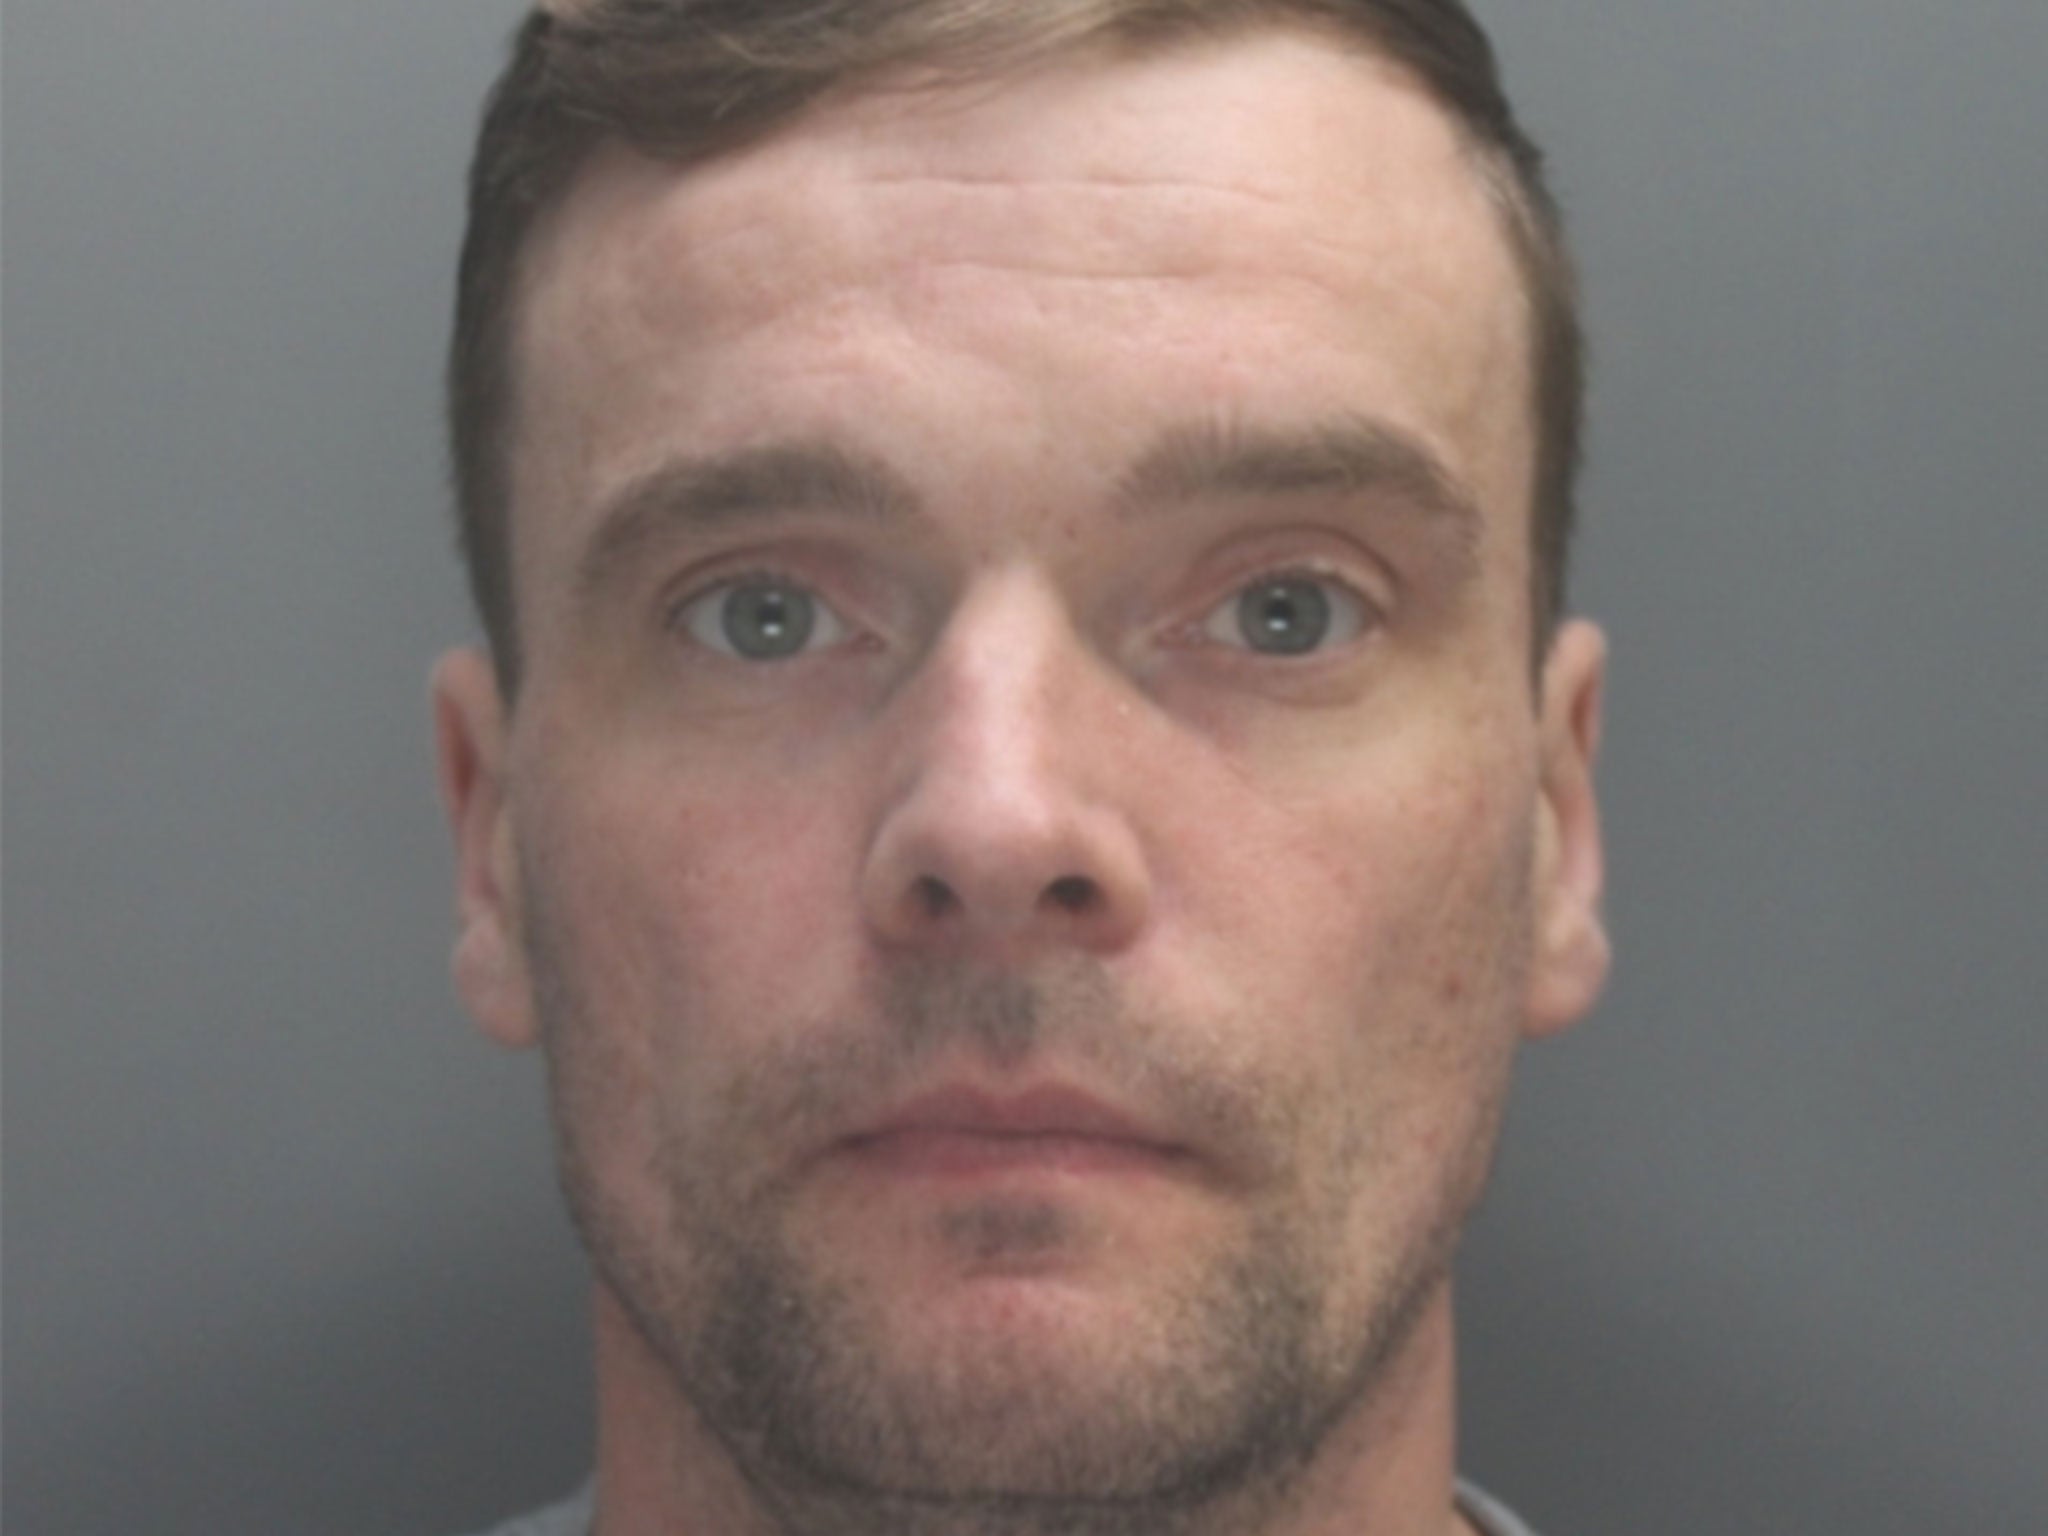 Paul Fellows has been jailed for life after being convicted of the gangland murders of Paul Massey and John Kinsella